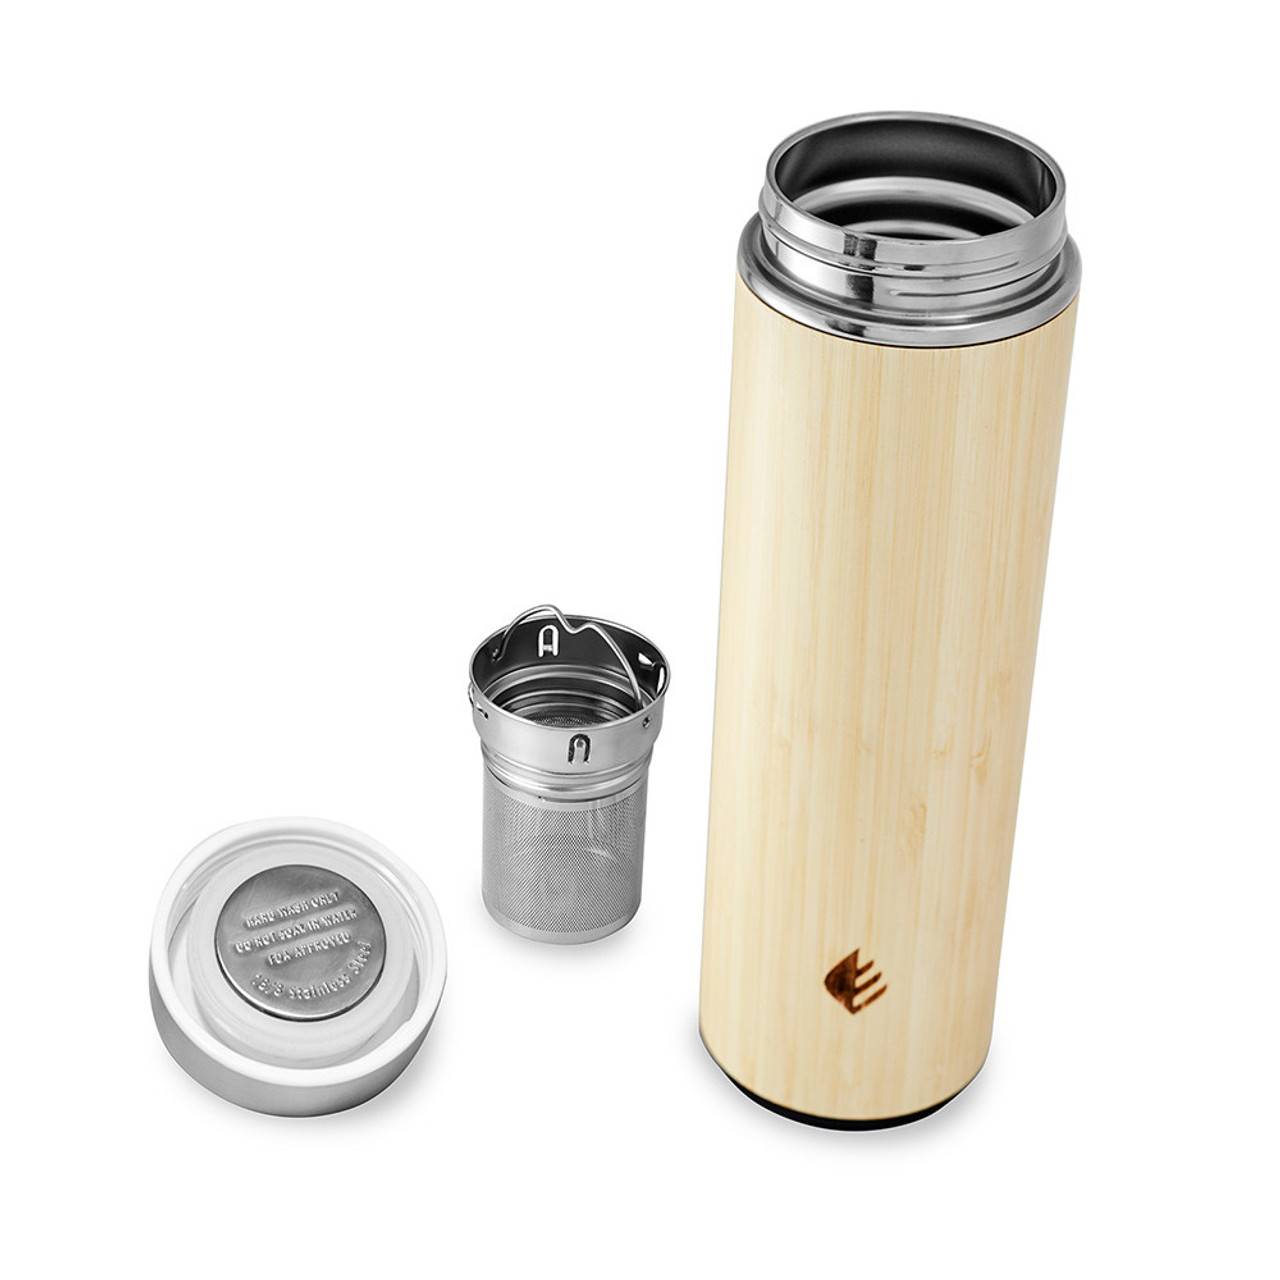 Organic Bamboo Tumbler with Tea Infuser & Strainer Insulated BPA-Free Coffee Travel Mug With Mesh Filter for Brewing Loose Leaf 17oz Stainless Steel Water Bottle Grey Sleeve-Jane Austen 